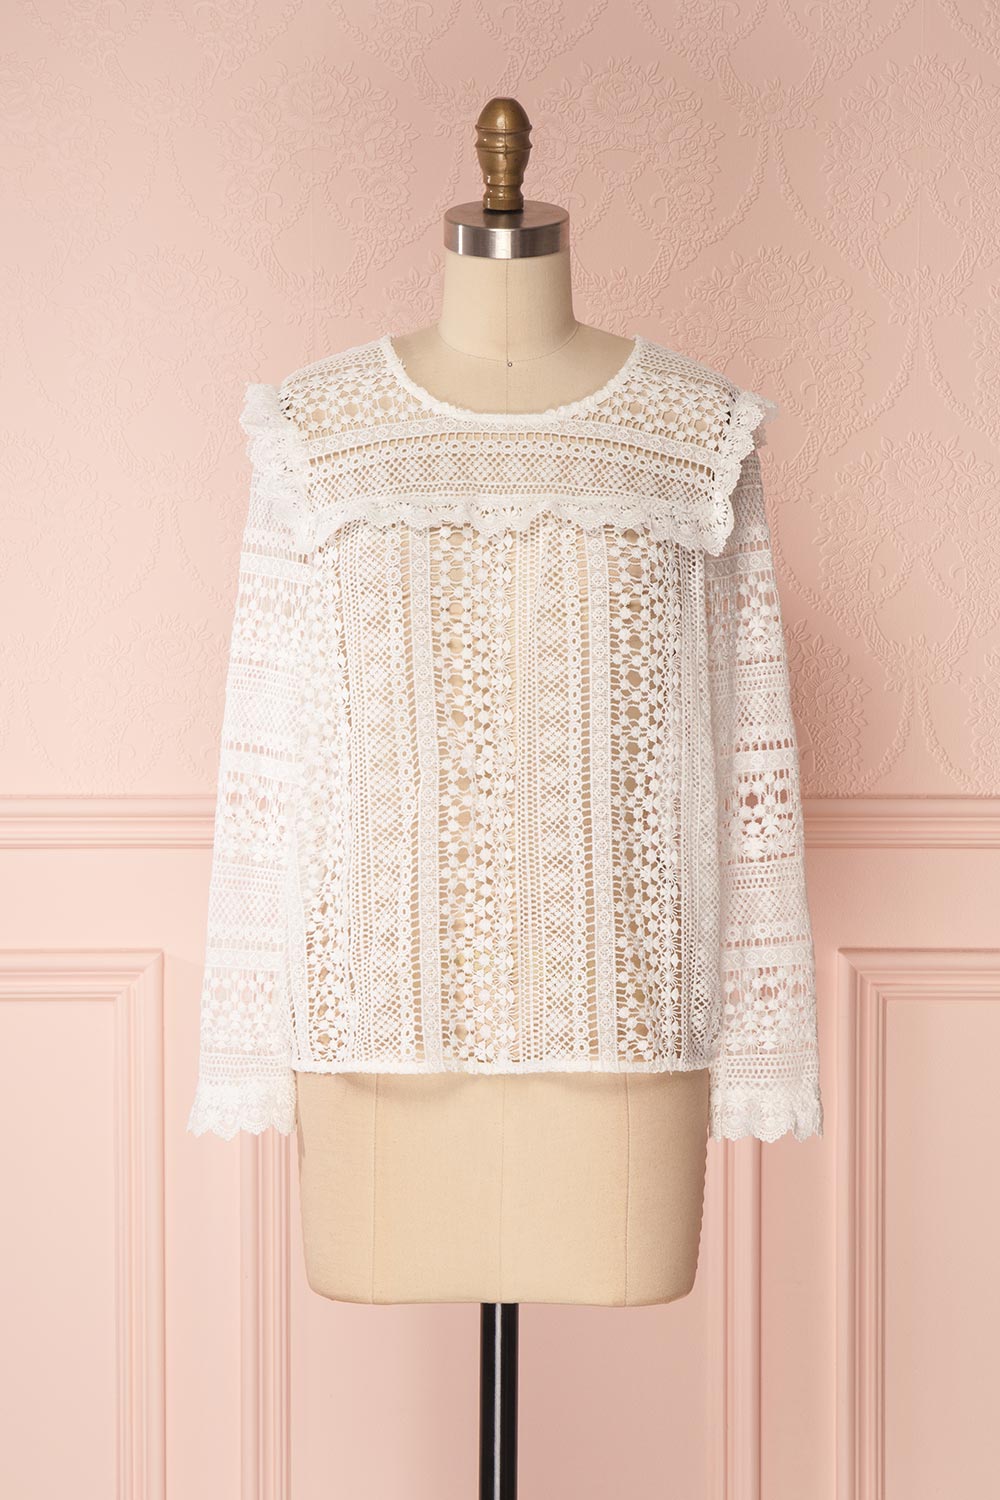 Nina-Lou White Crocheted Lace Long Sleeves Top | Boutique 1861 1